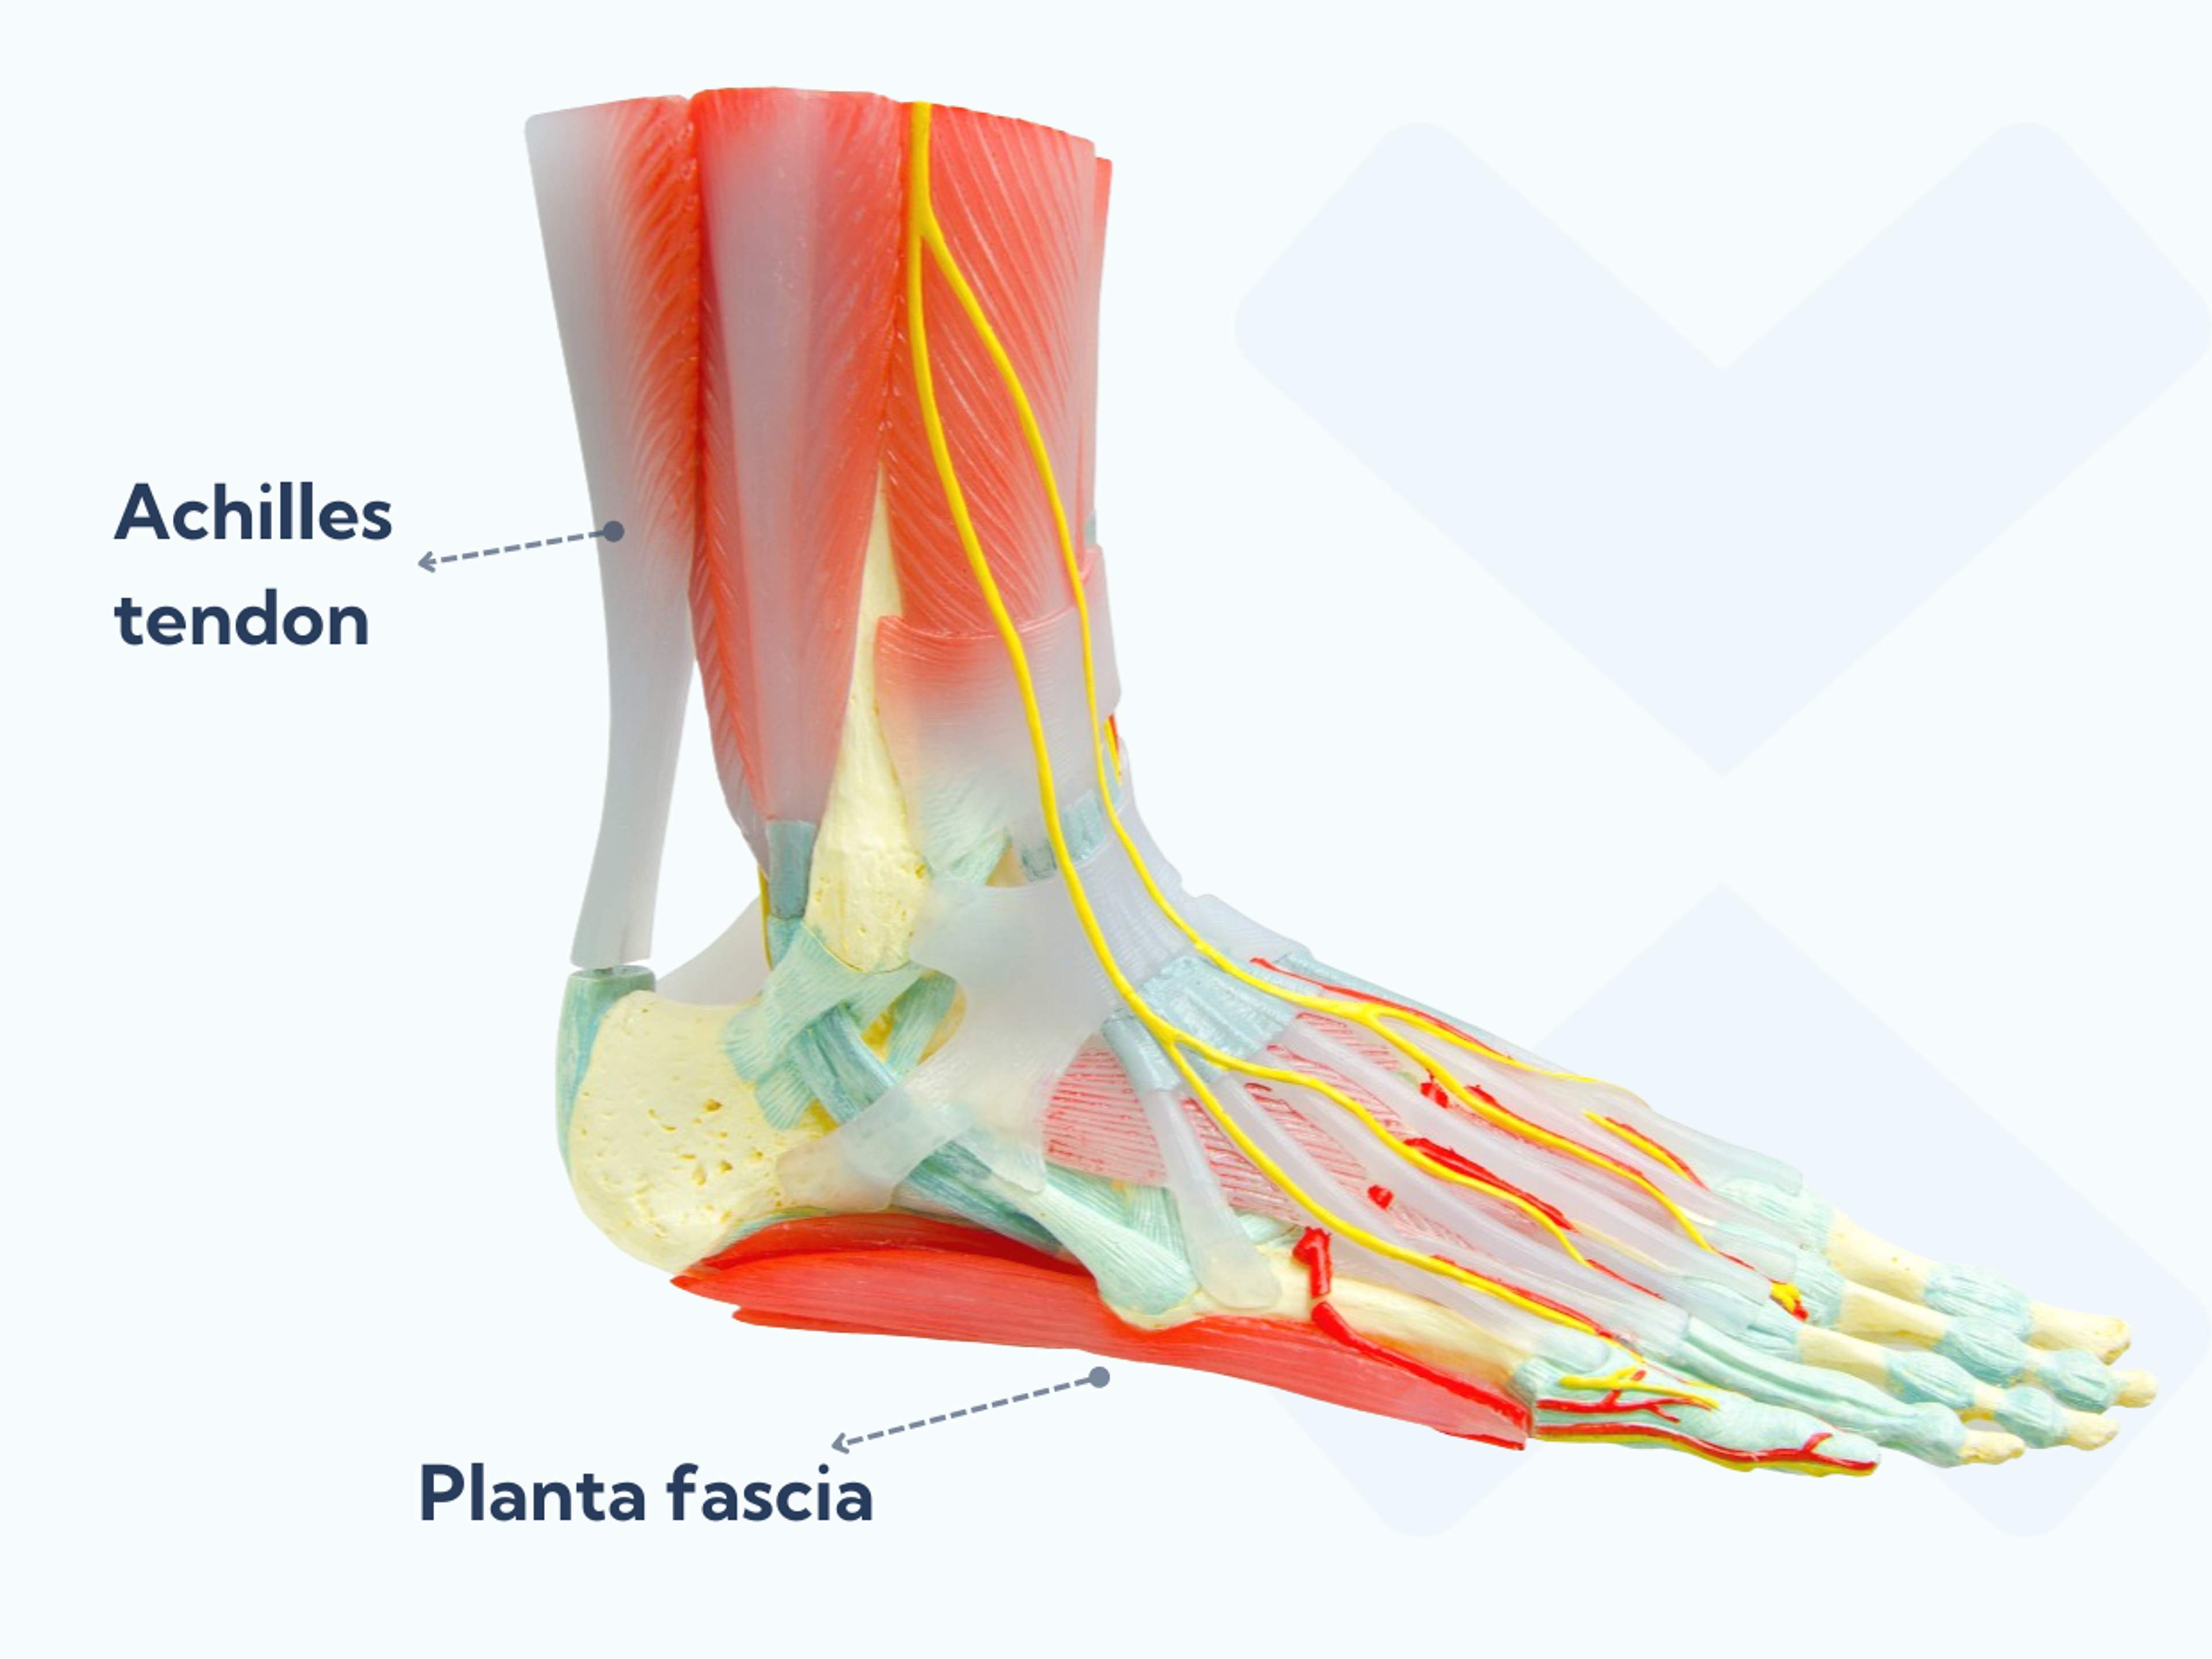 The pain from plantar fasciitis is felt under the foot. In contrast, the pain from Achilles tendonitis is felt anywhere along the Achilles tendon.